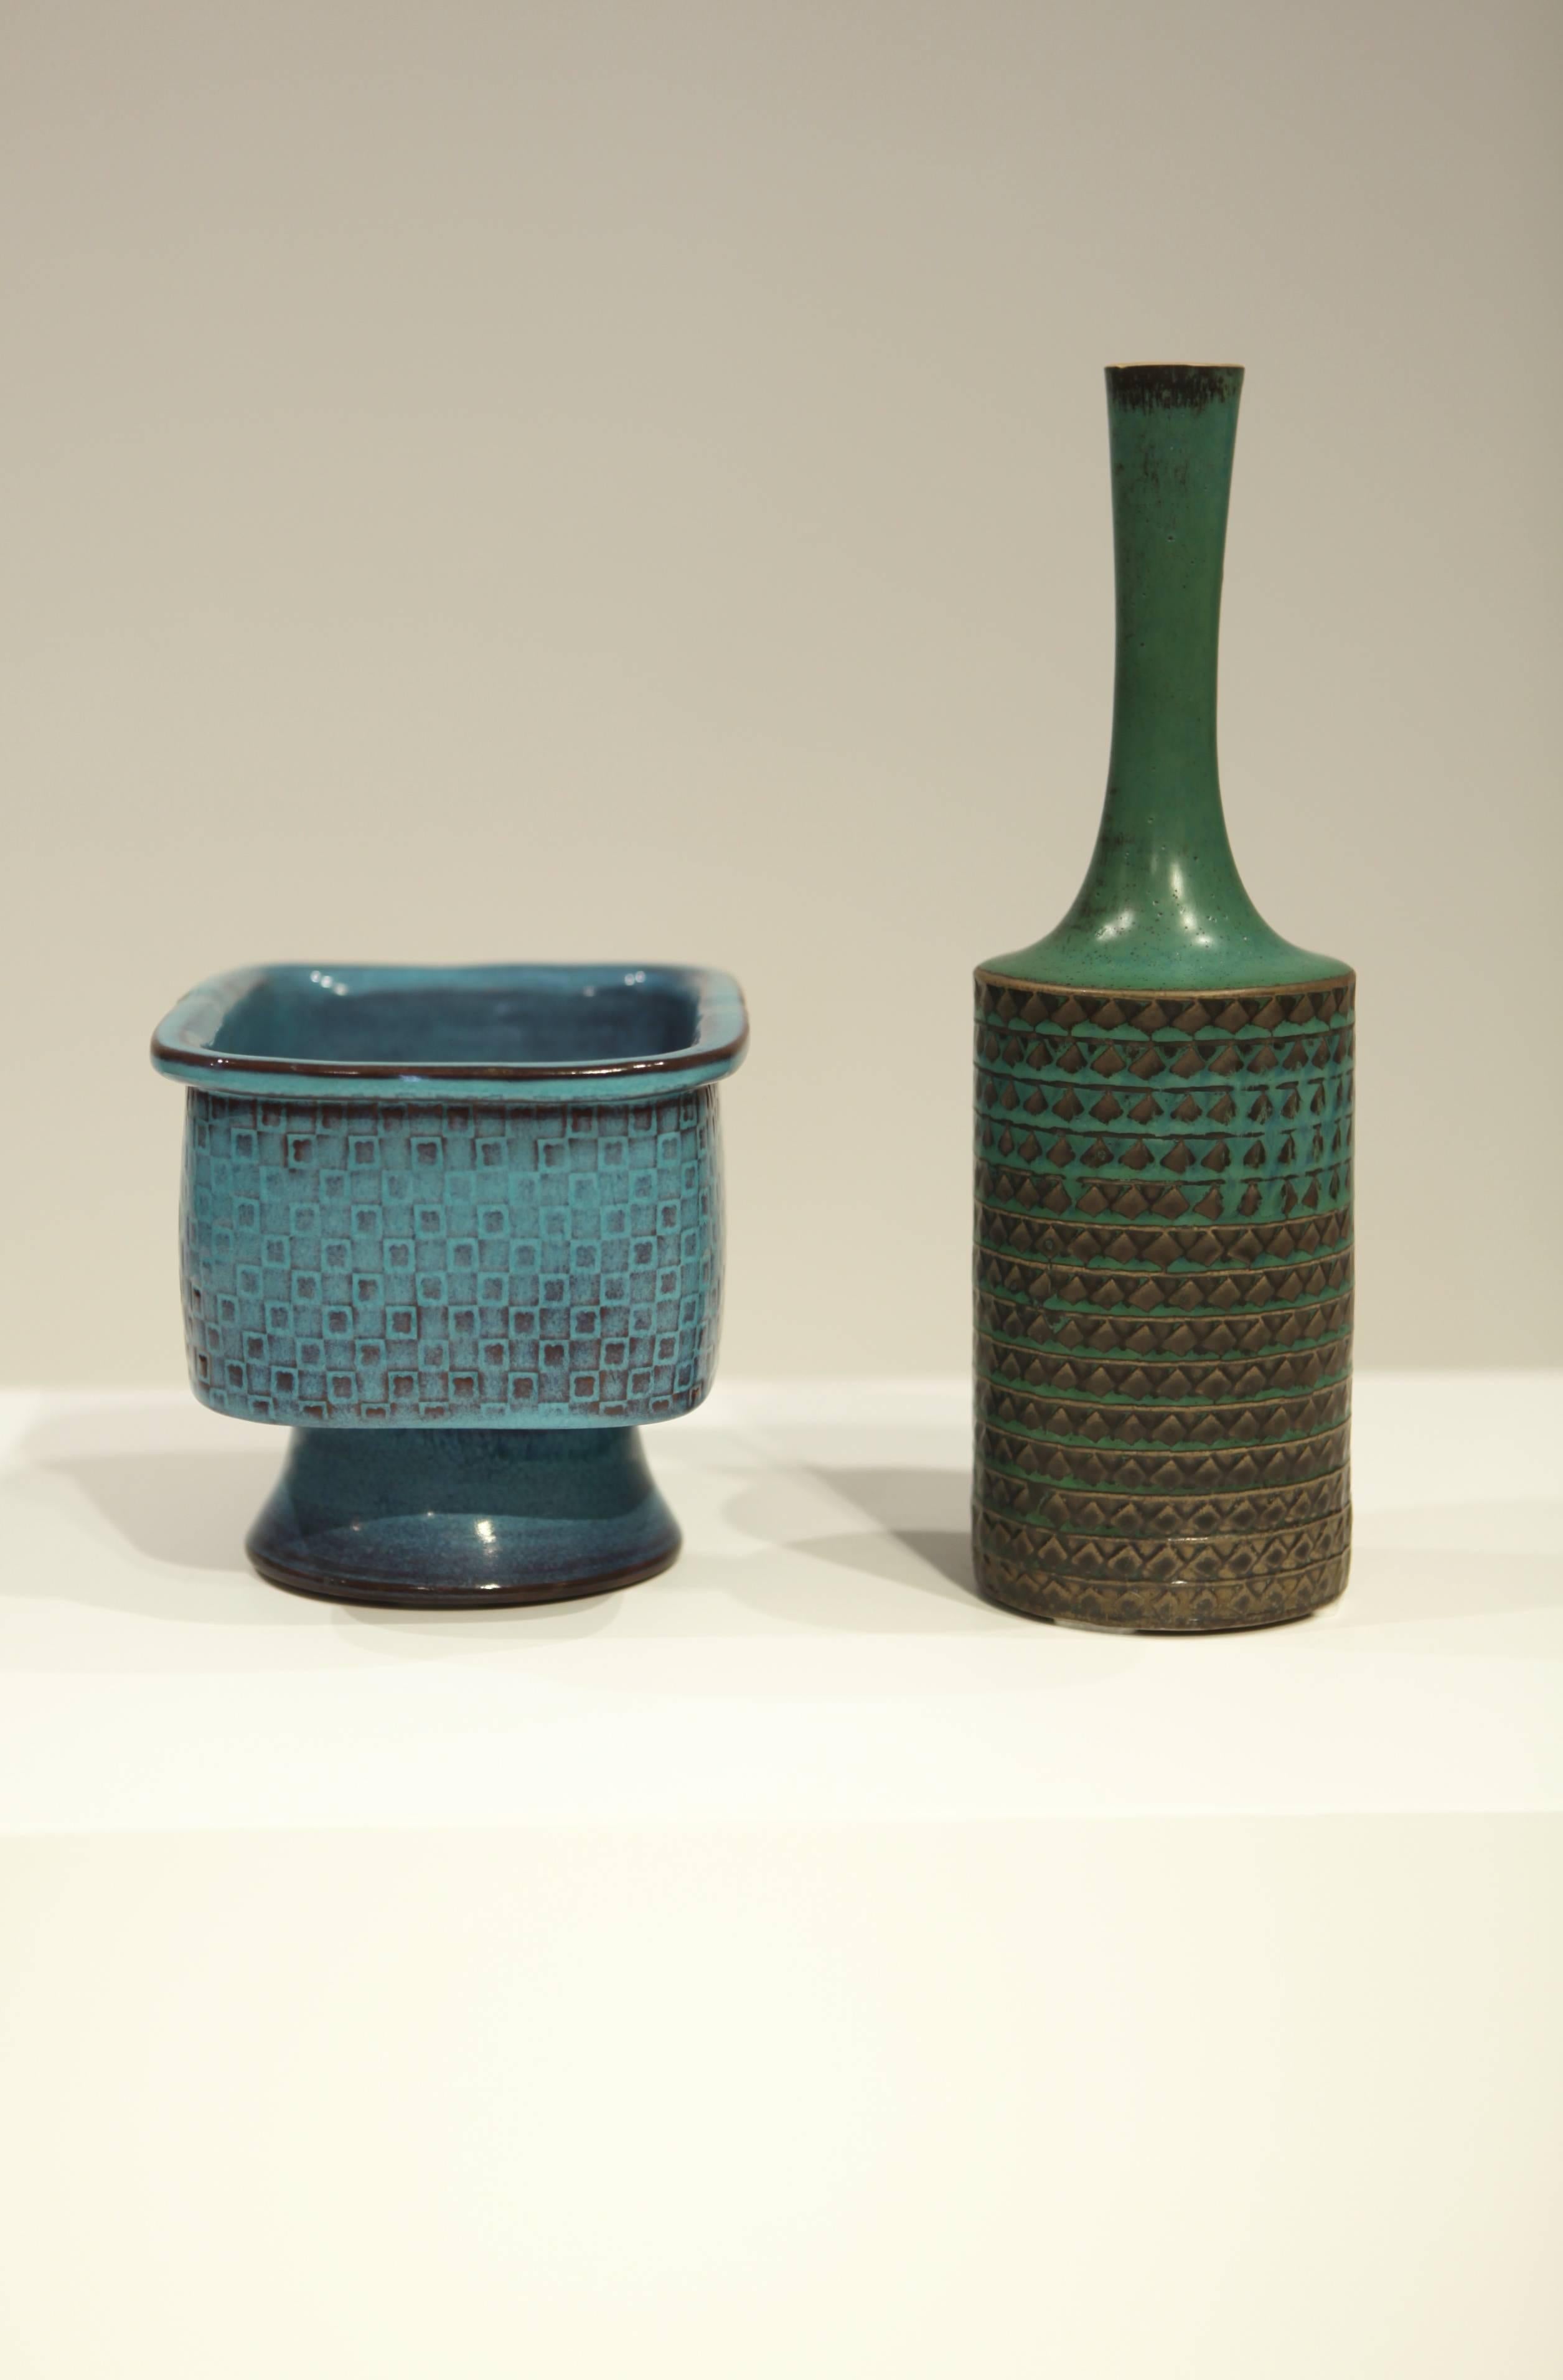 The Turquoise glazed is Gustavsberg Studio 1967, with a square decor.
Signed G, Studiohand Stig L. / 13.5cm high, 20cm wide and 14cm deep.

The vase in the green glaze is Gustavsberg Studio, 1965.
Signed G, Studiohand Stig L. / 29.5cm high, 9cm